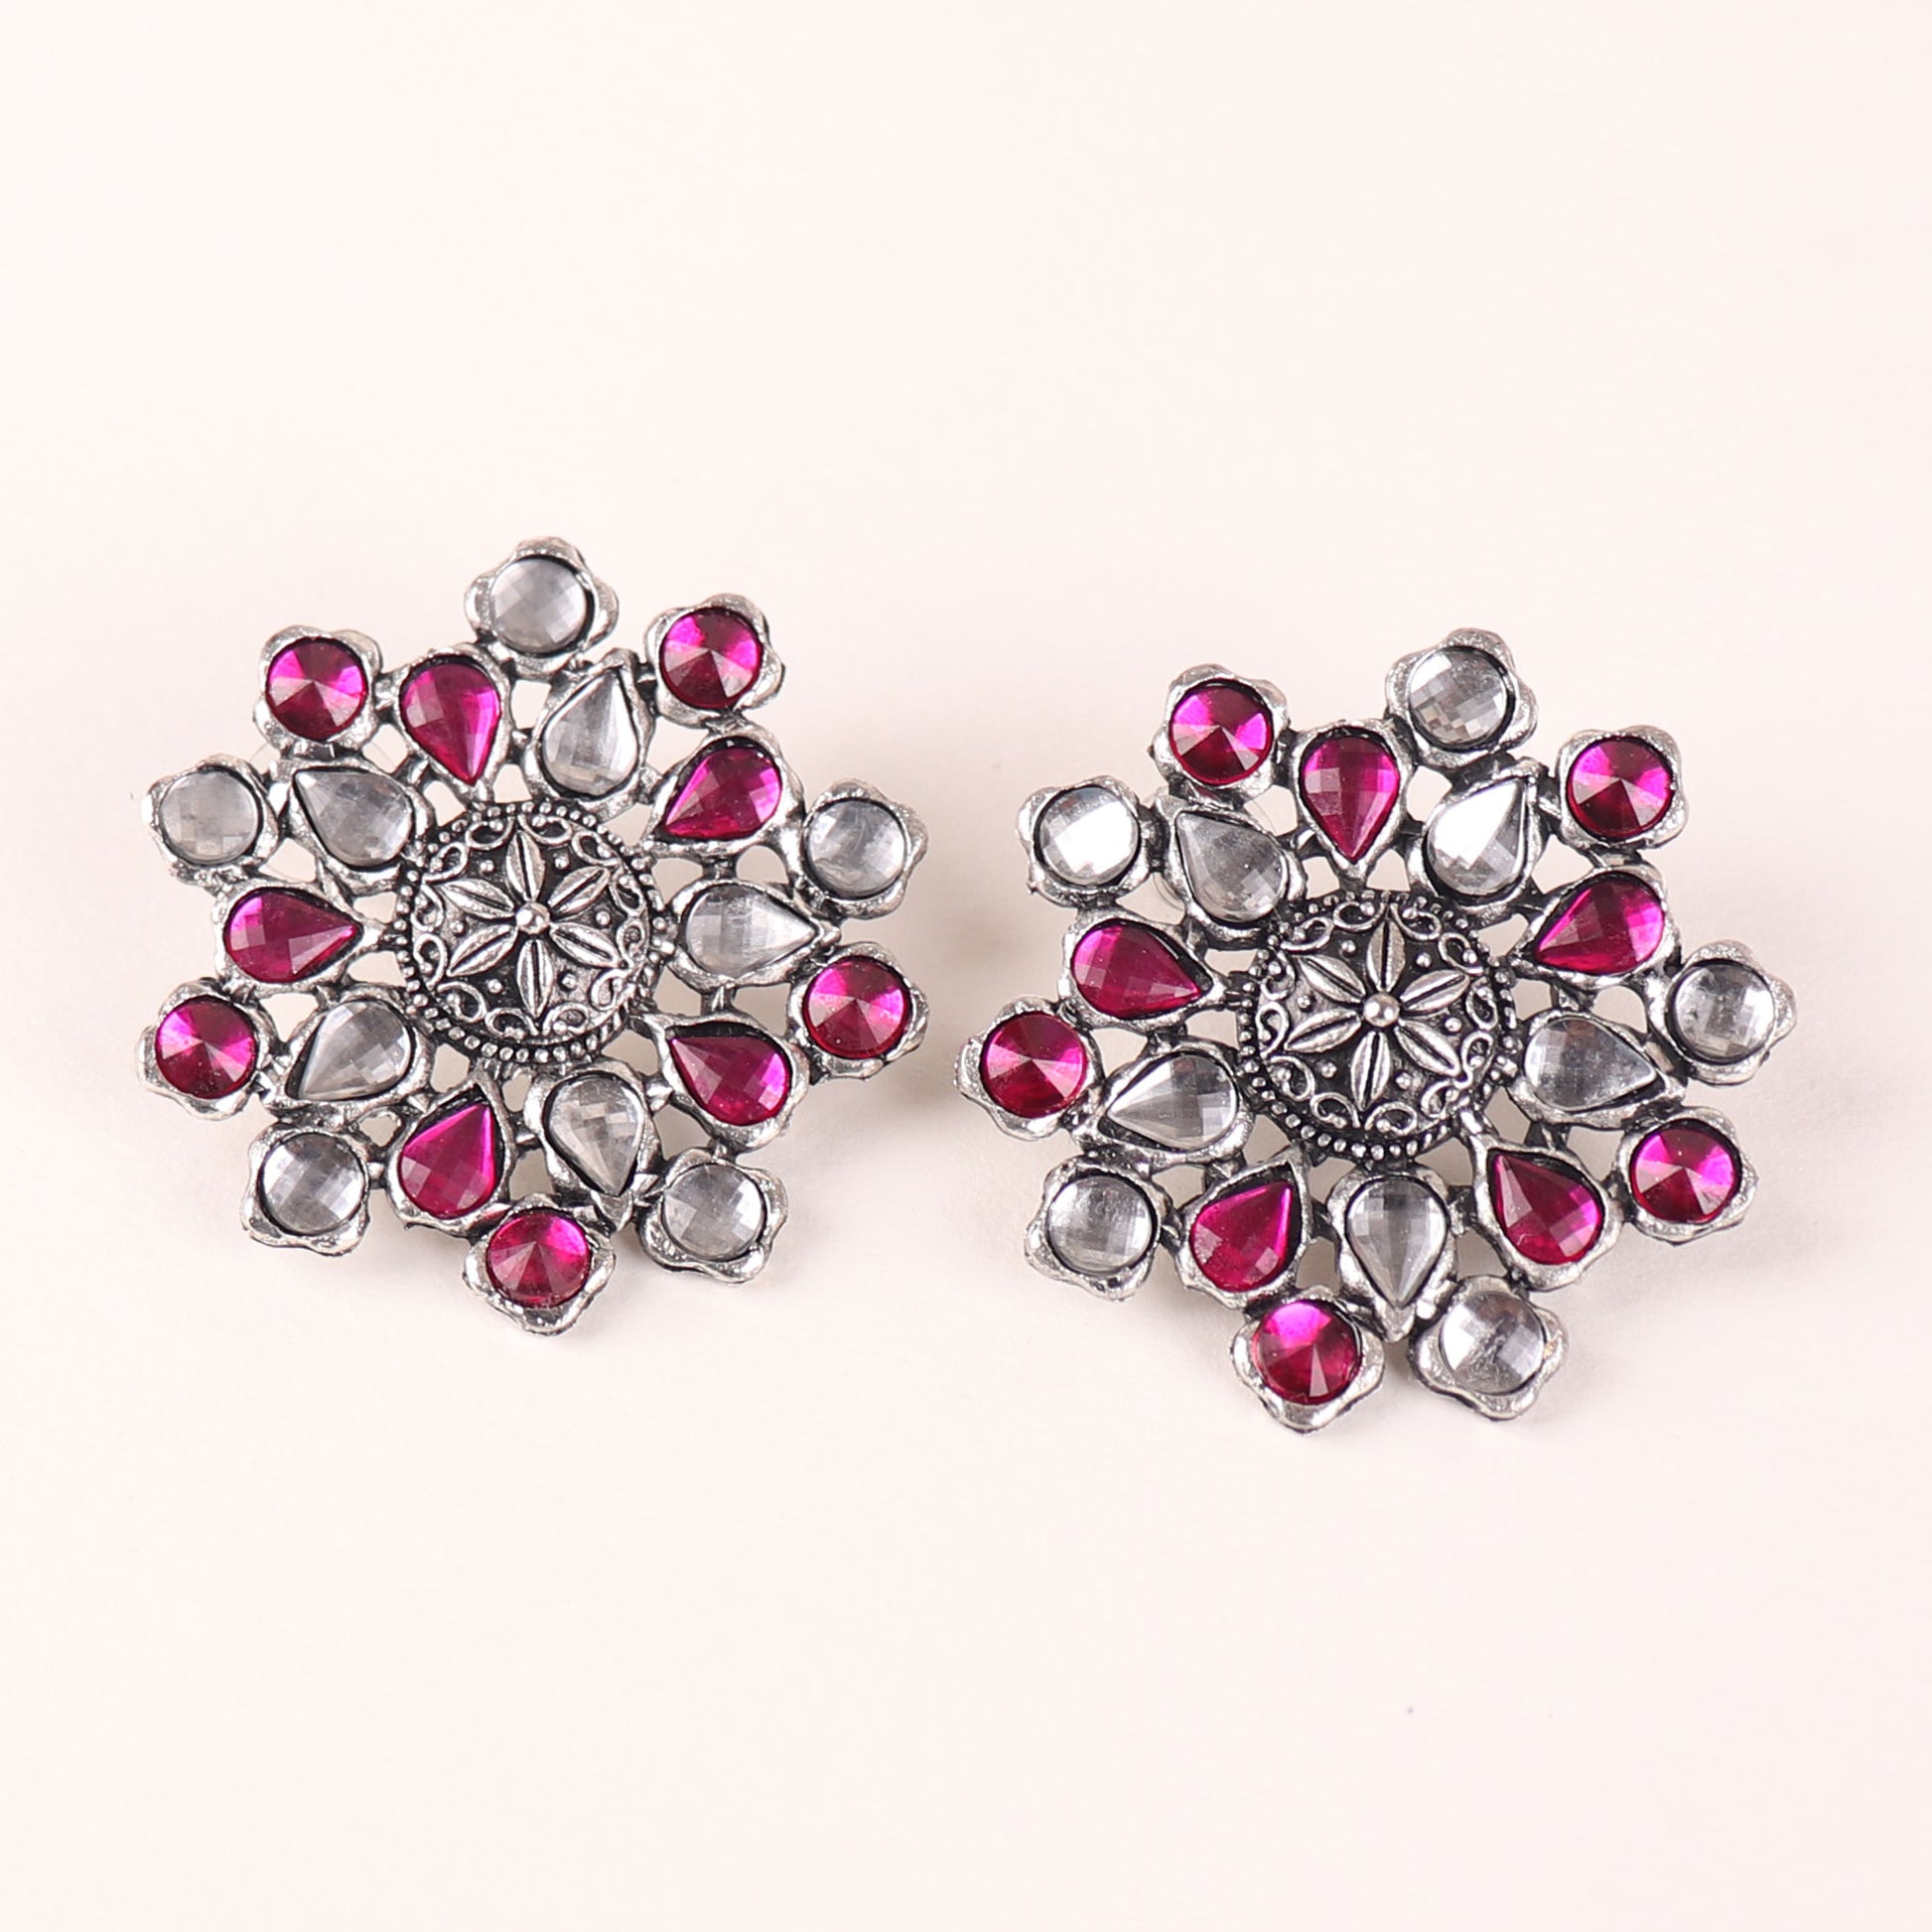 Earrings,The Pearl Hive Studs in Pink - Cippele Multi Store